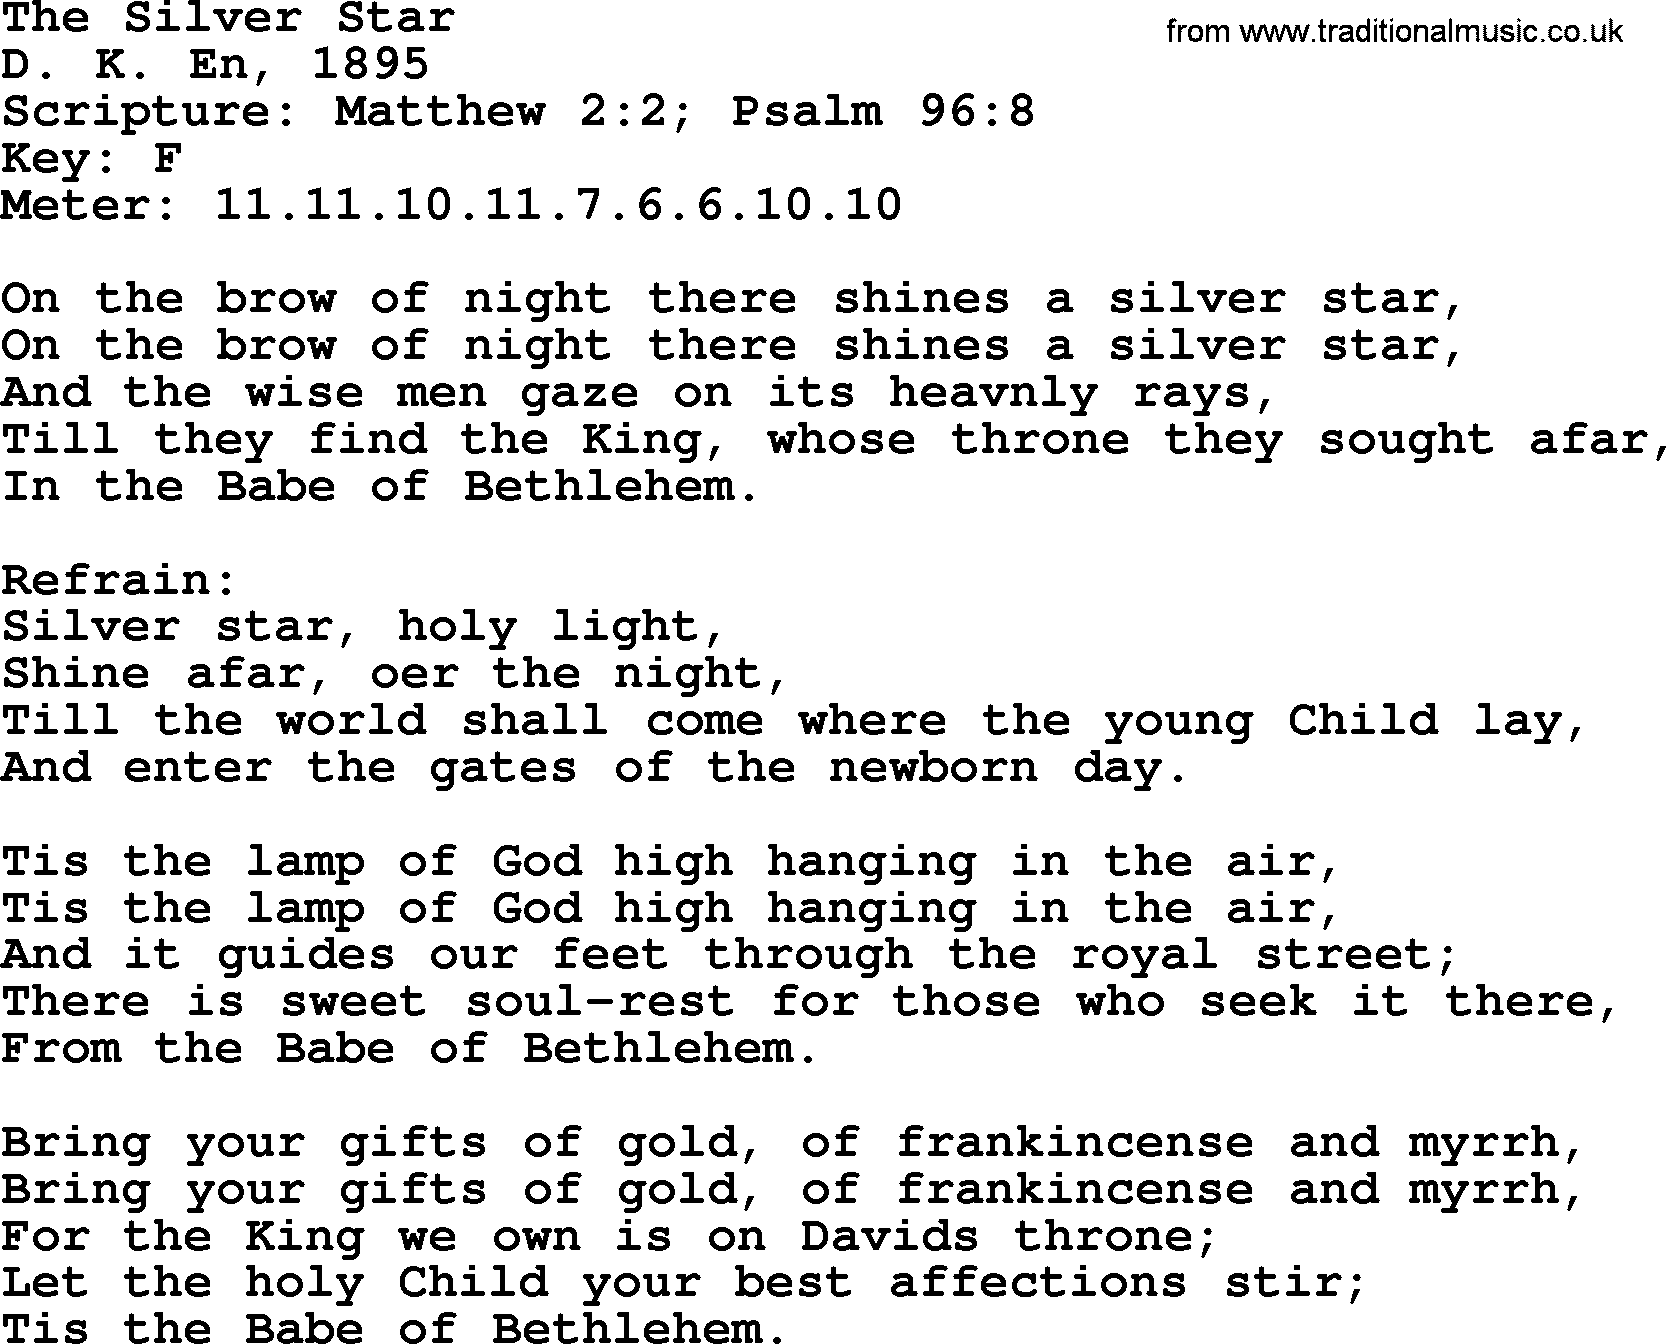 280 Christmas Hymns and songs with PowerPoints and PDF, title: The Silver Star, lyrics, PPT and PDF